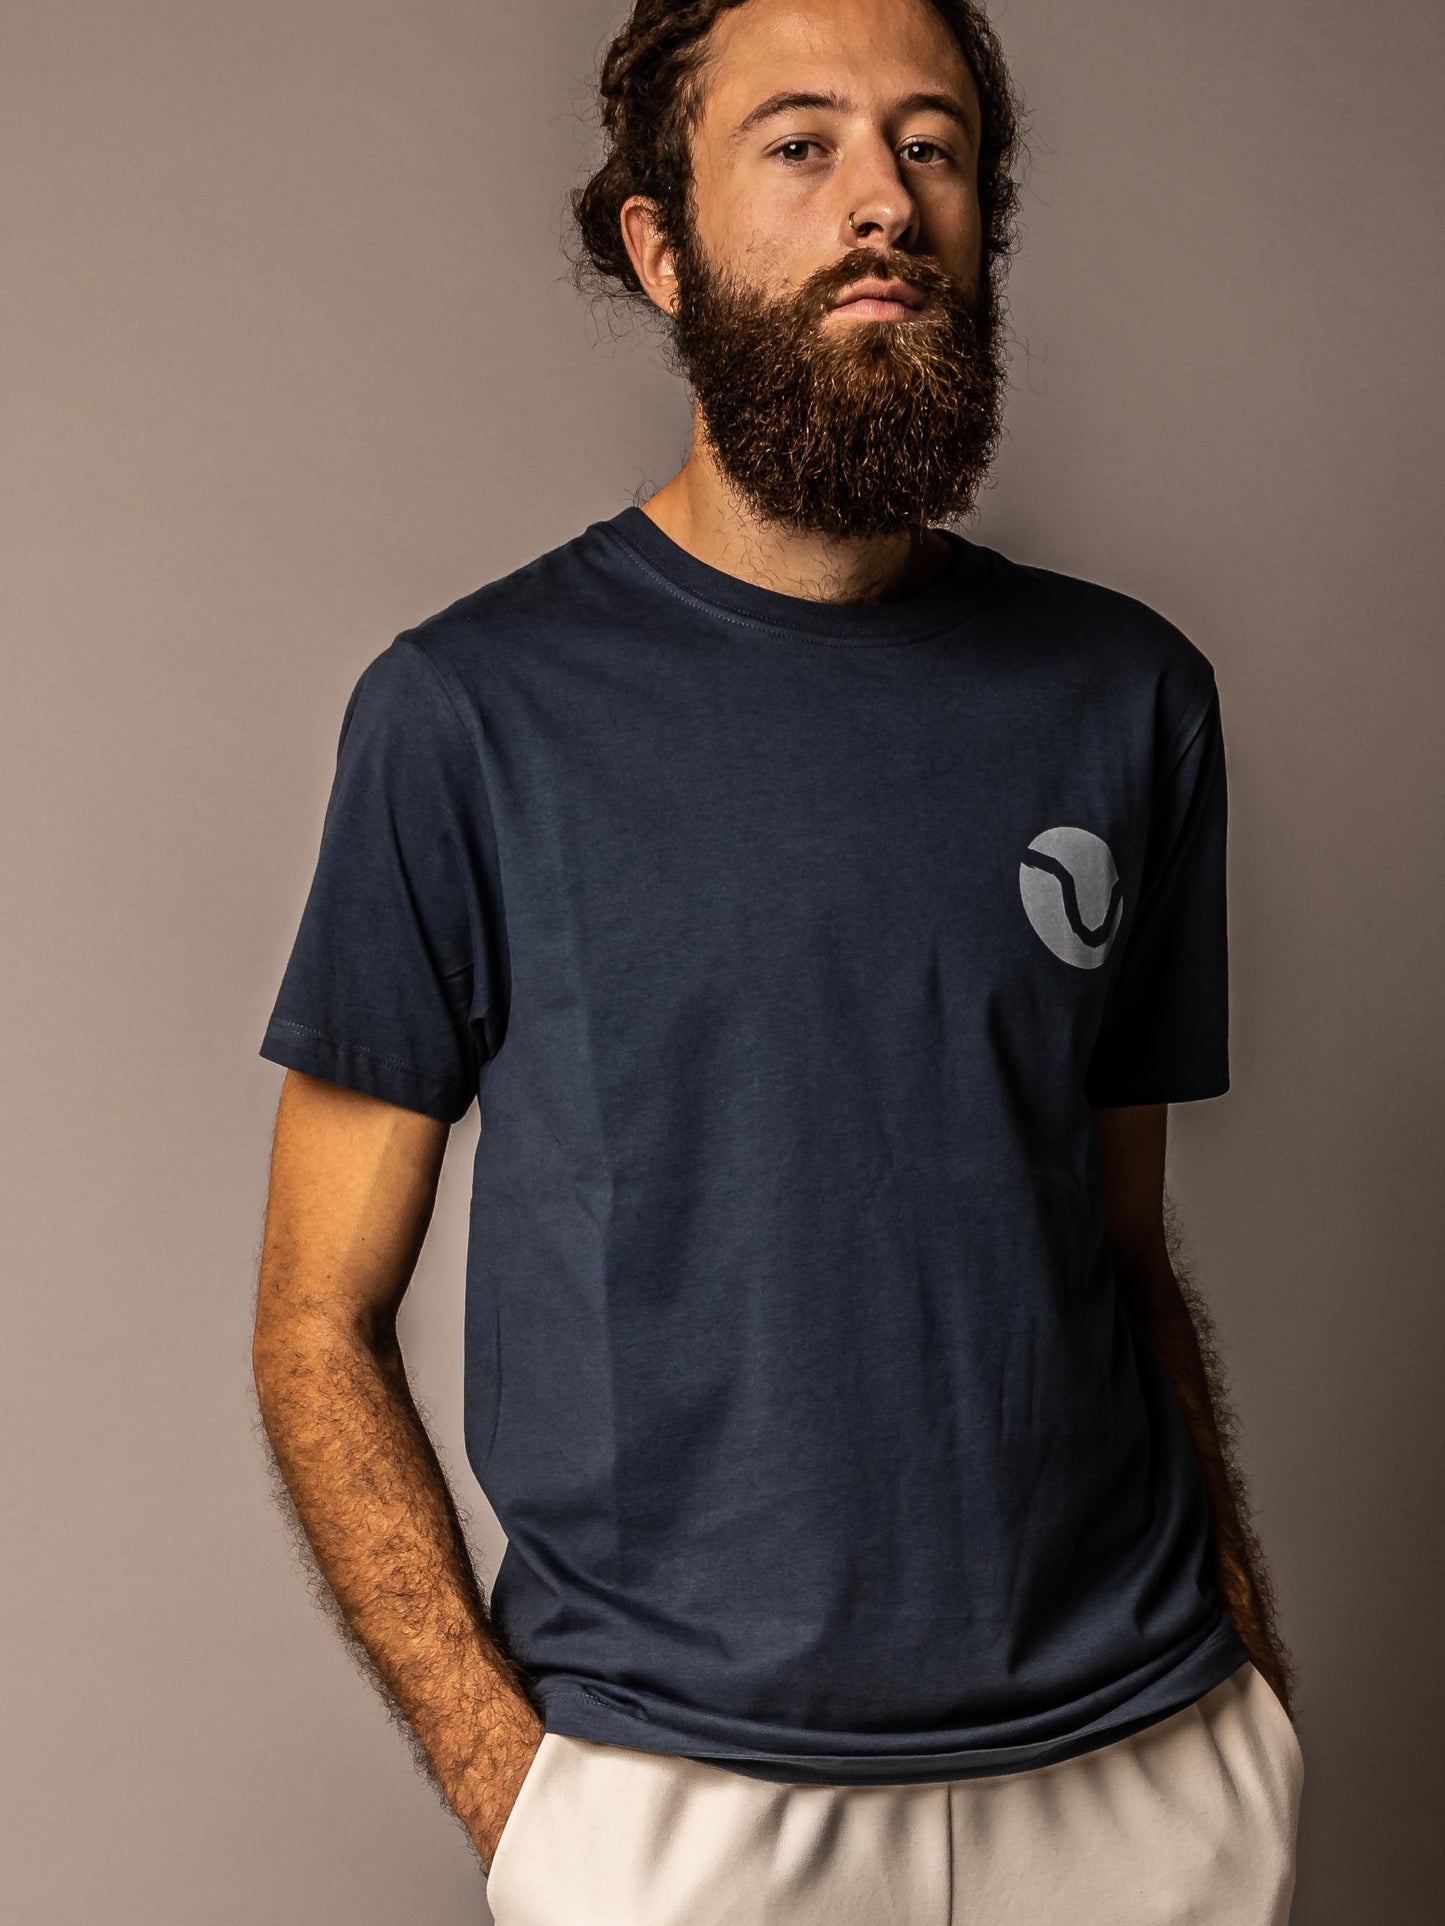 Blue men's t-shirt with Danube Bend pattern